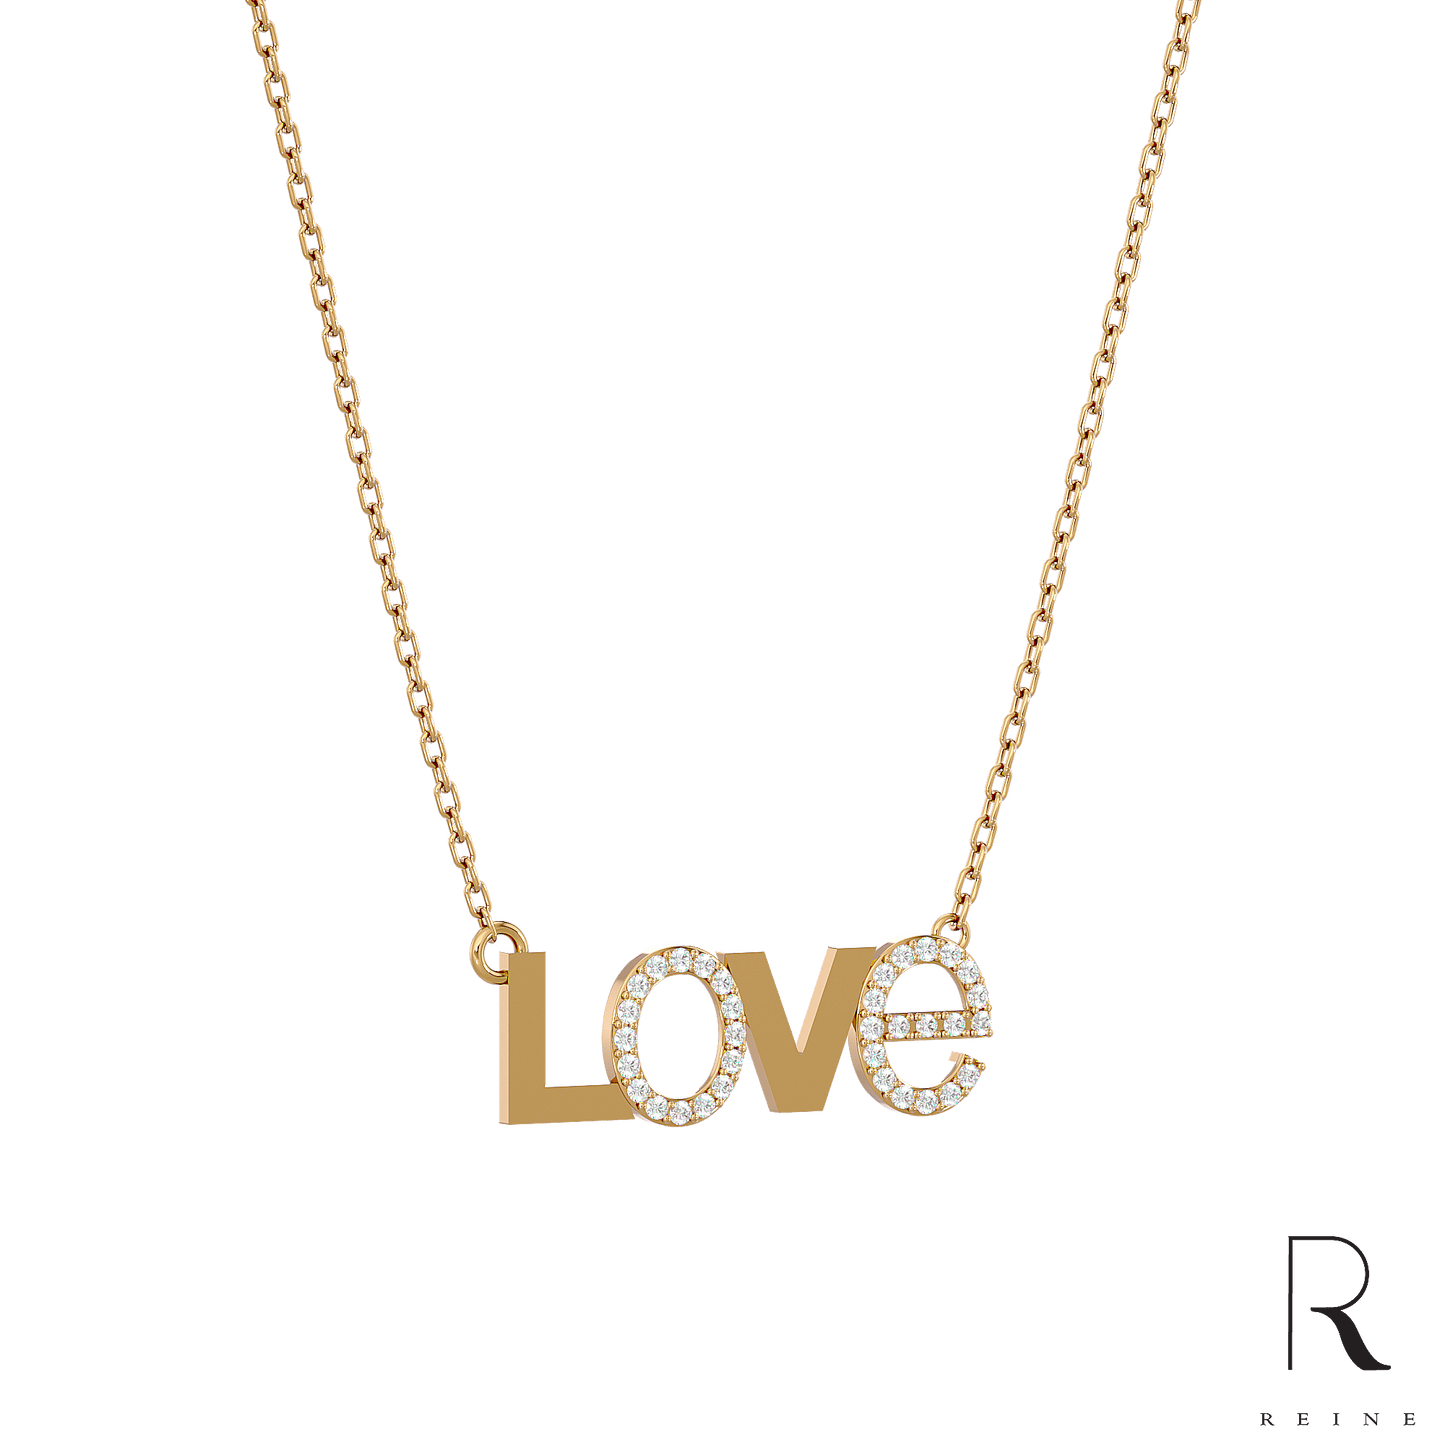 Love affection necklace